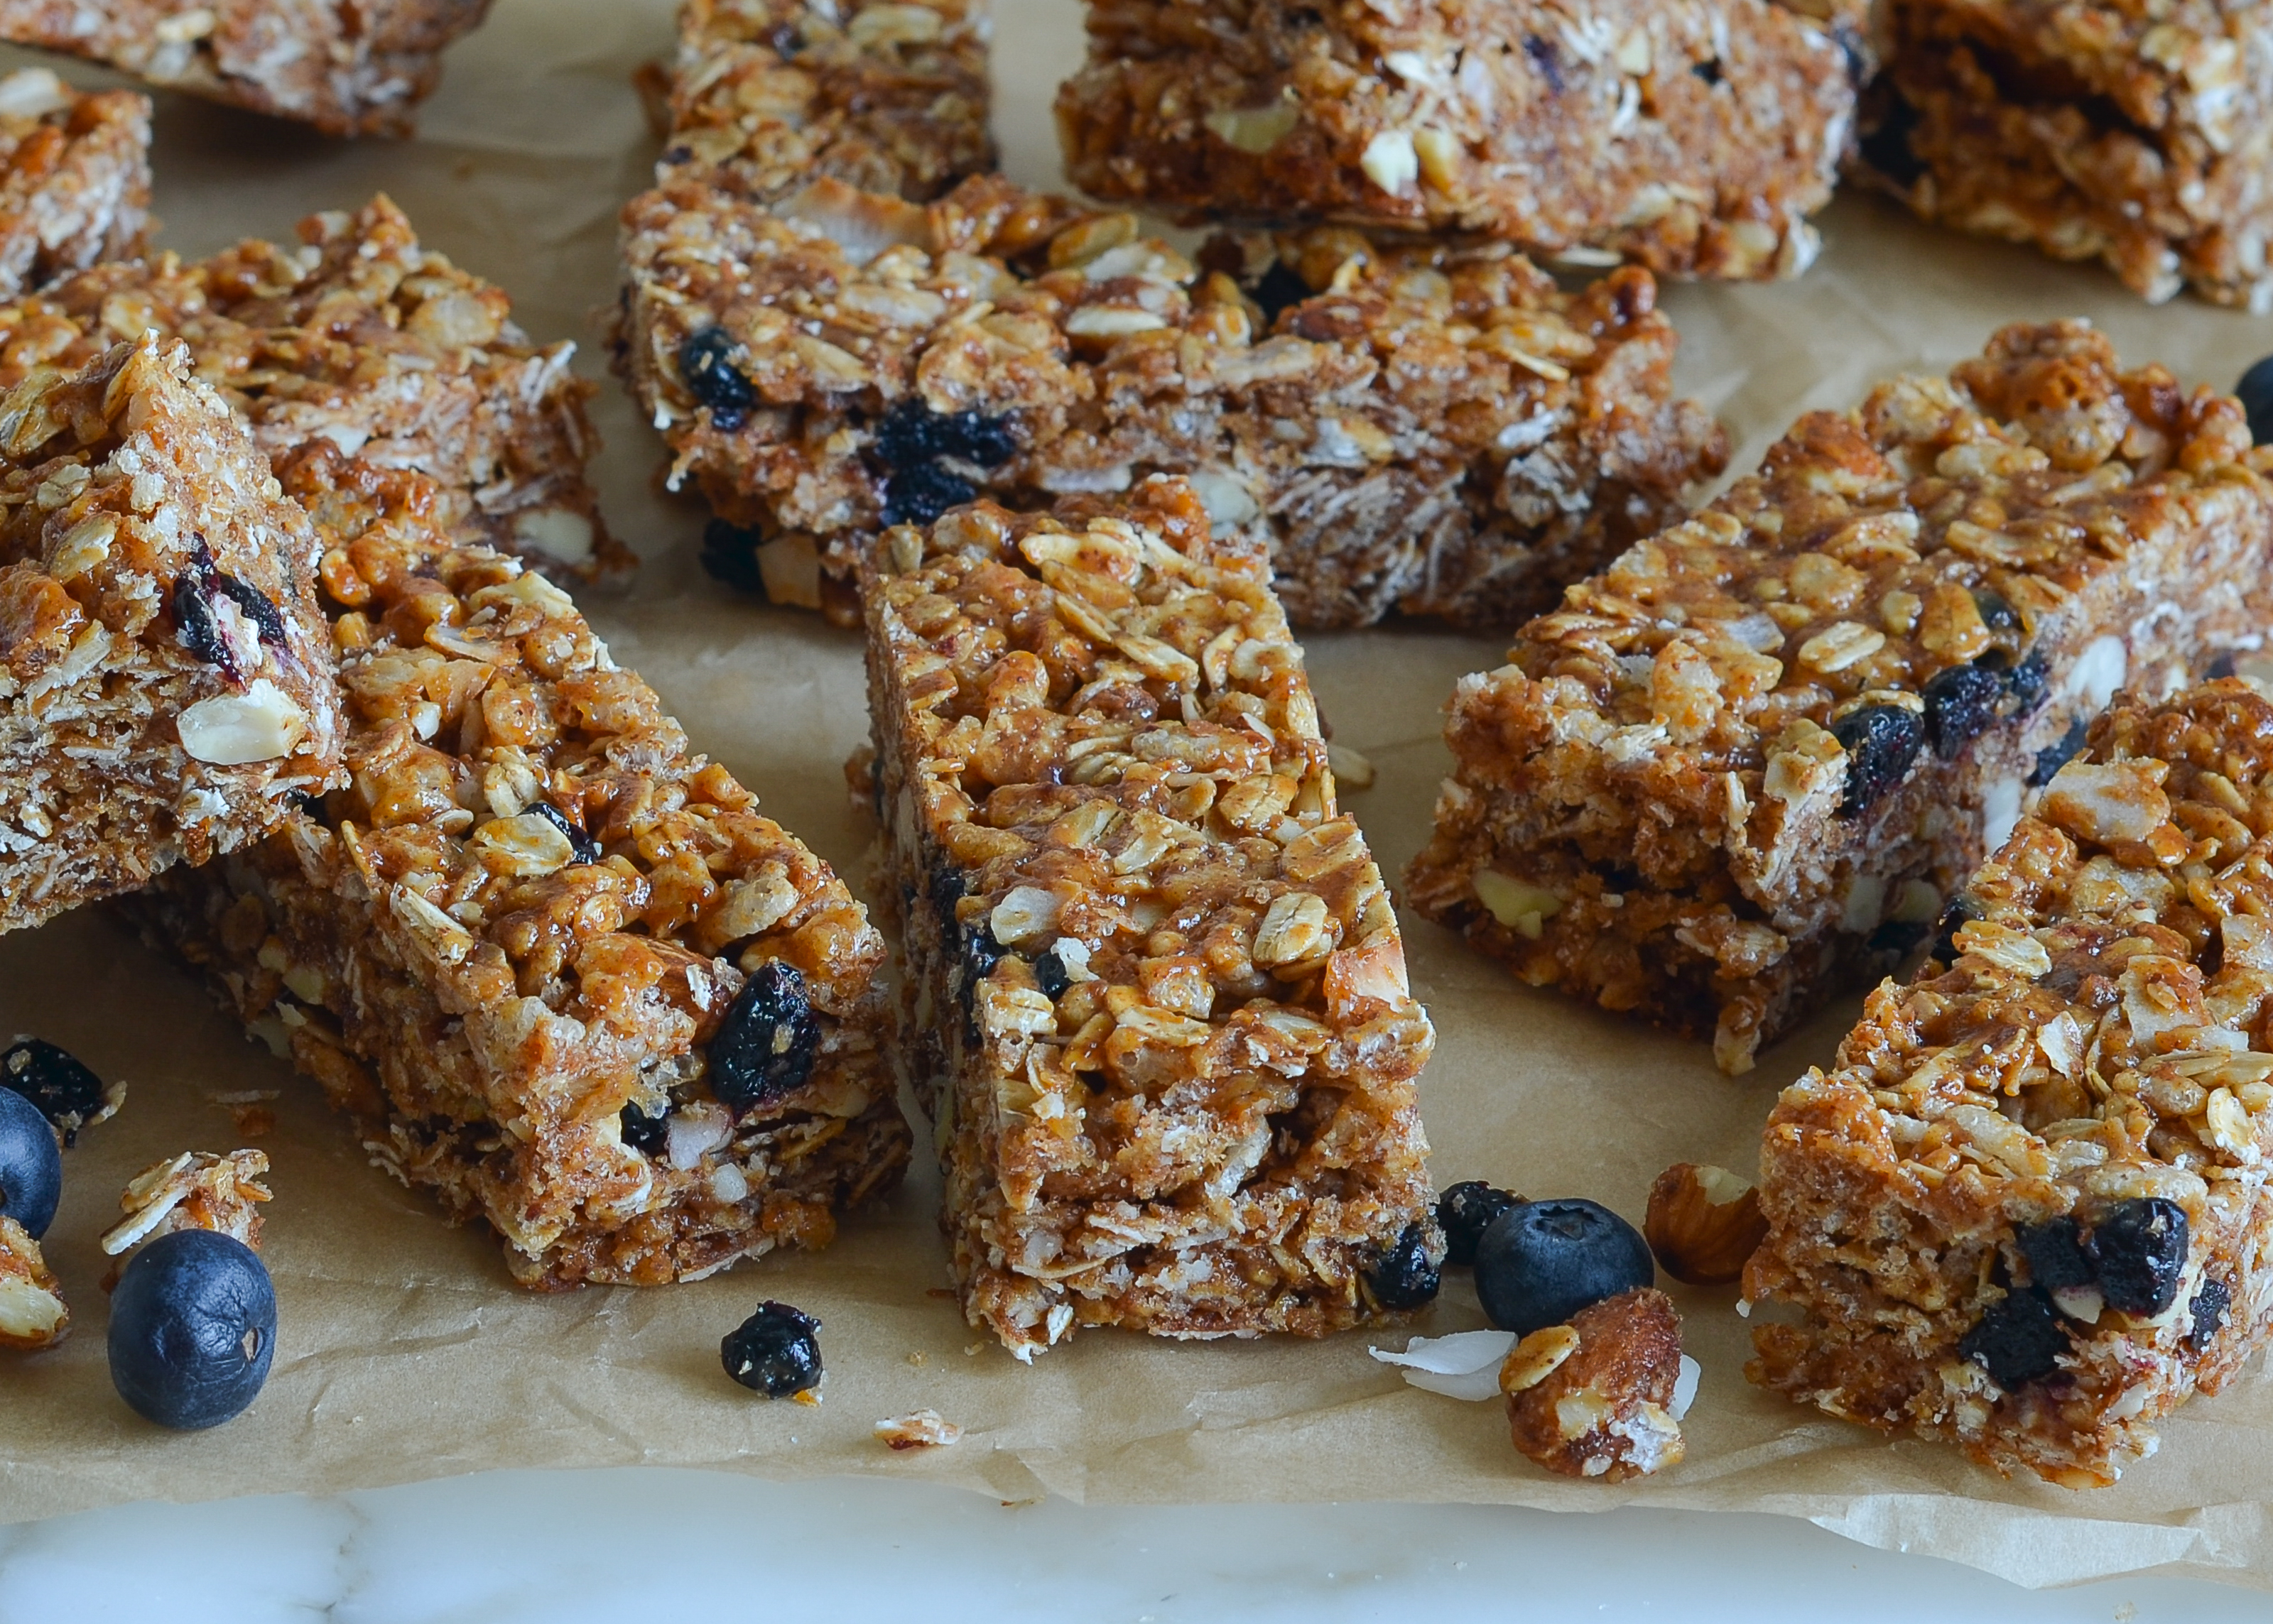 Almond, Blueberry & Date Homemade Granola Bars - Once Upon a Chef